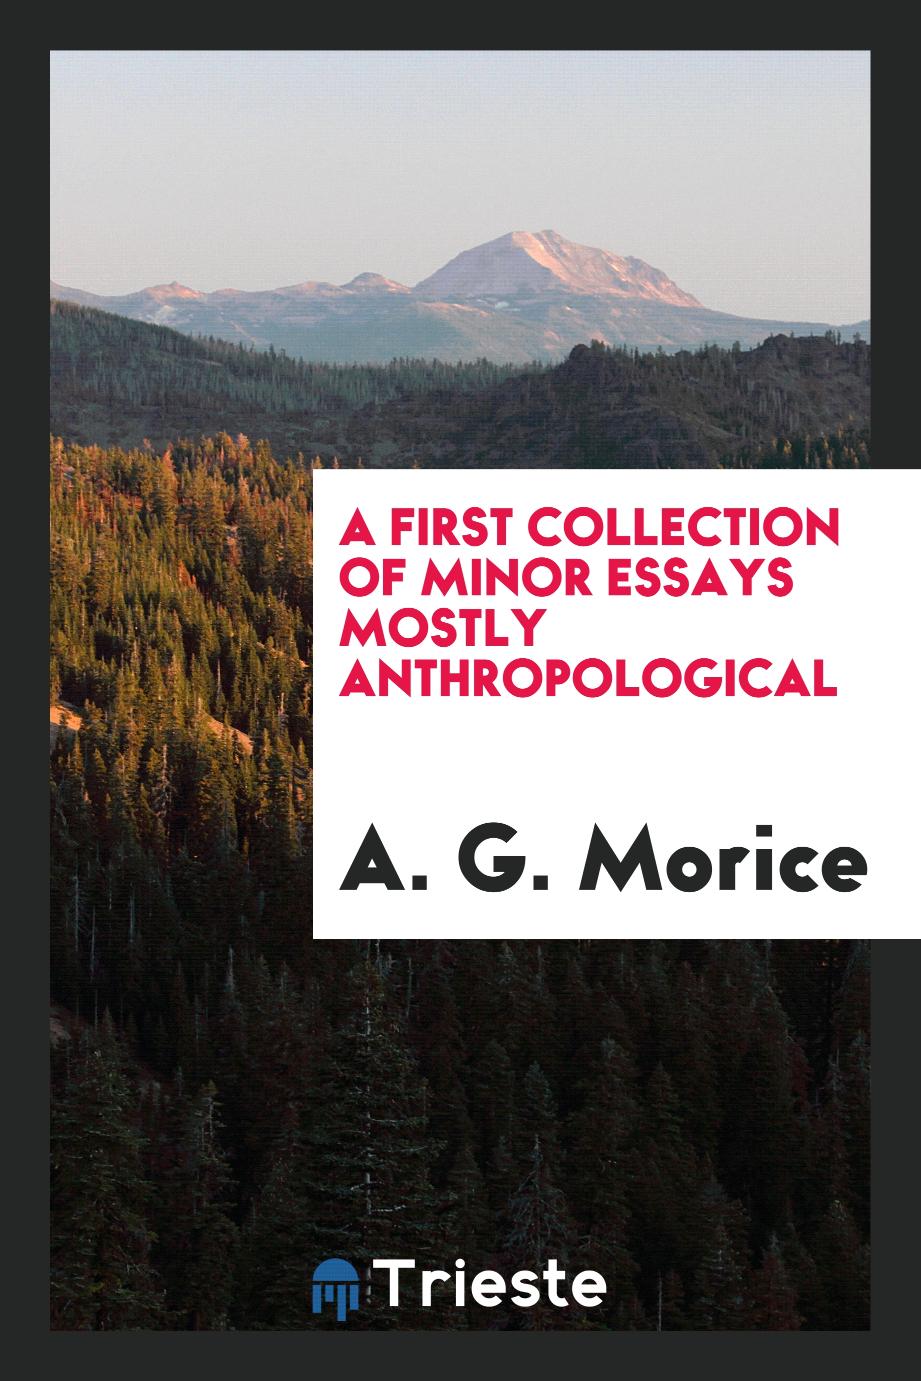 A First Collection of Minor Essays Mostly Anthropological